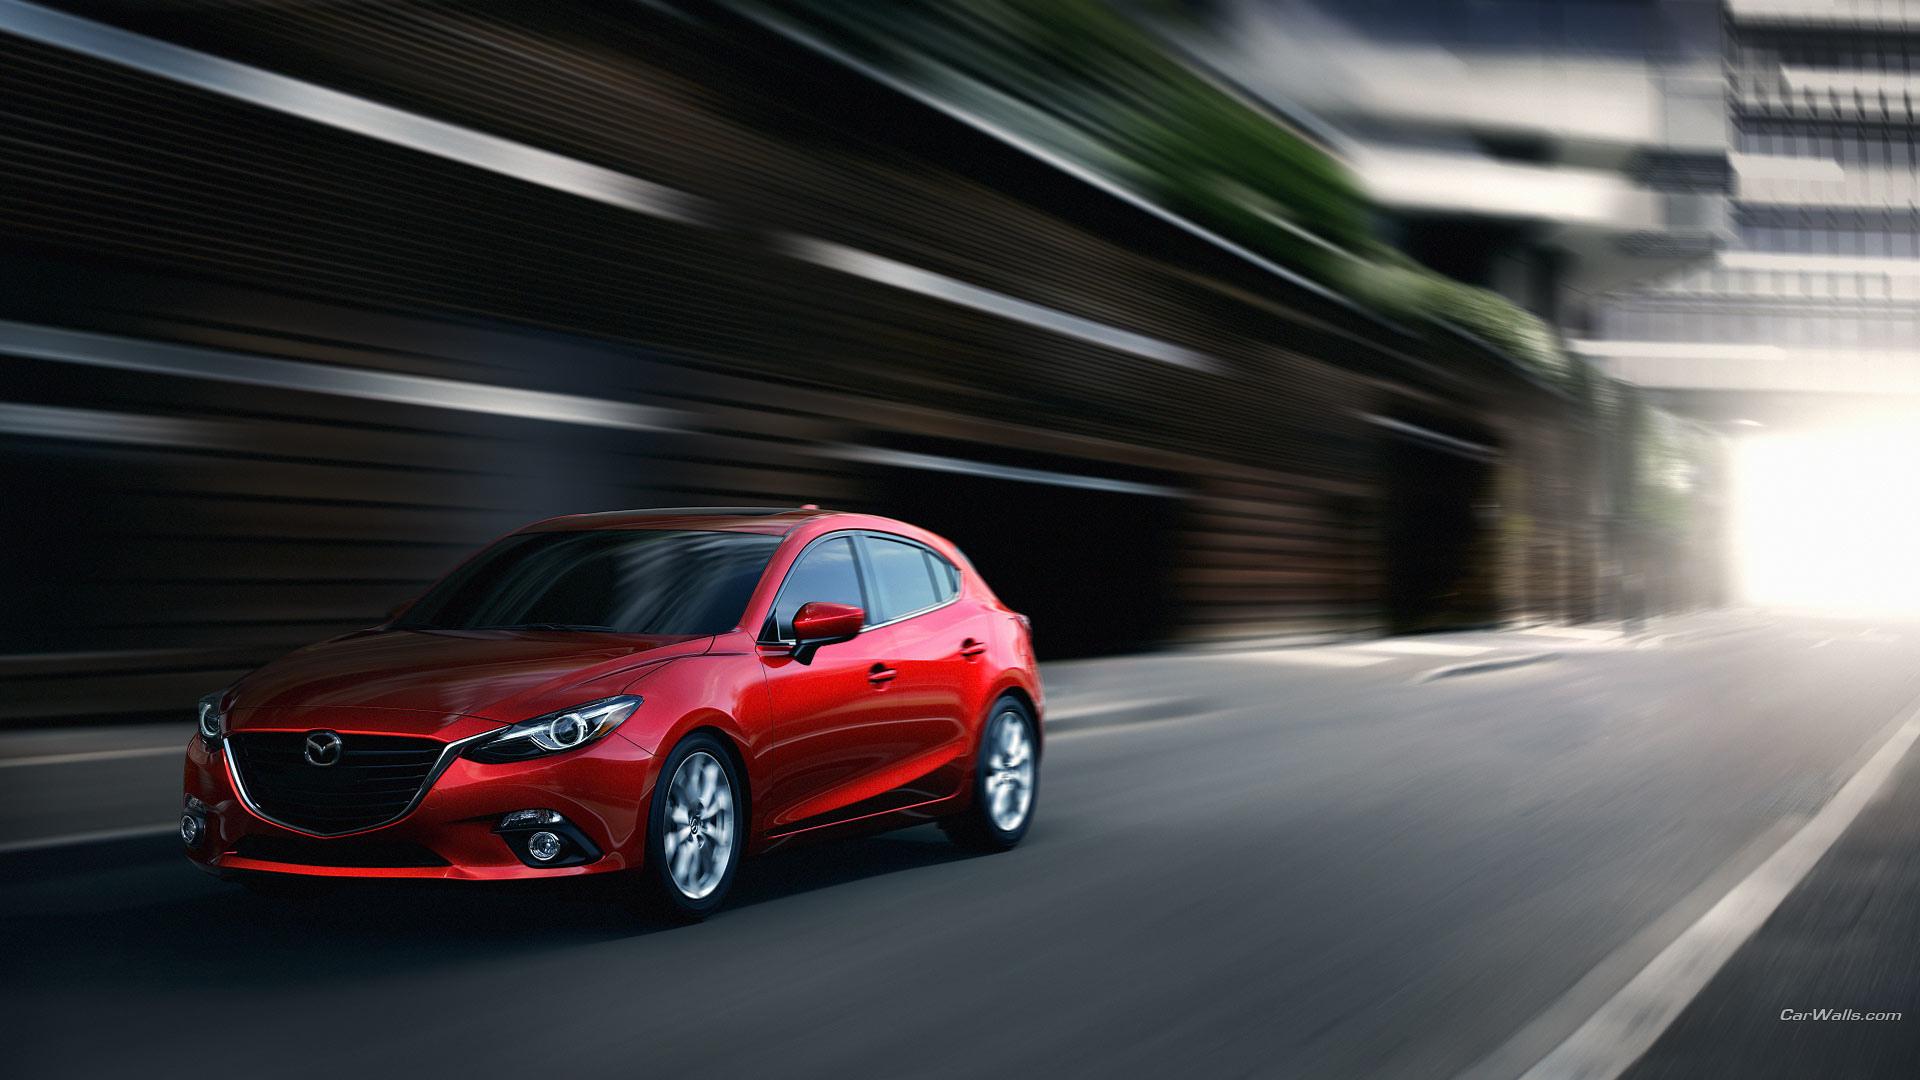 2014 Mazda 3 wallpapers HD quality